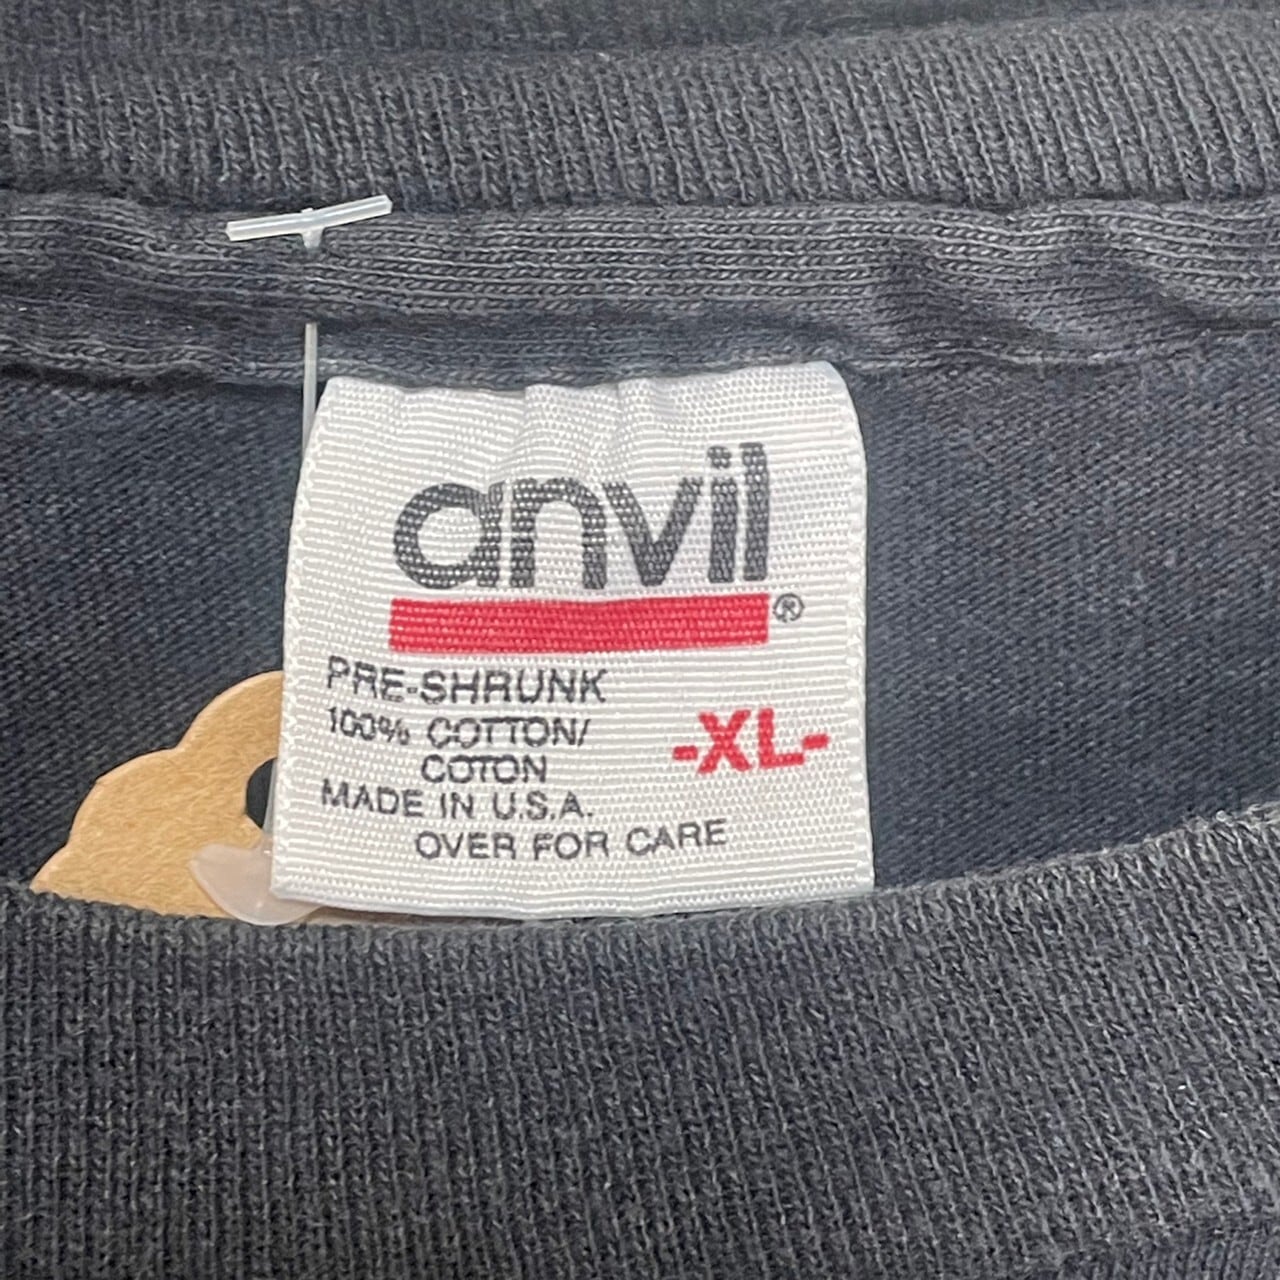 Made in USA】anvil 半袖Tシャツ XL プリント | 古着屋OLDGREEN